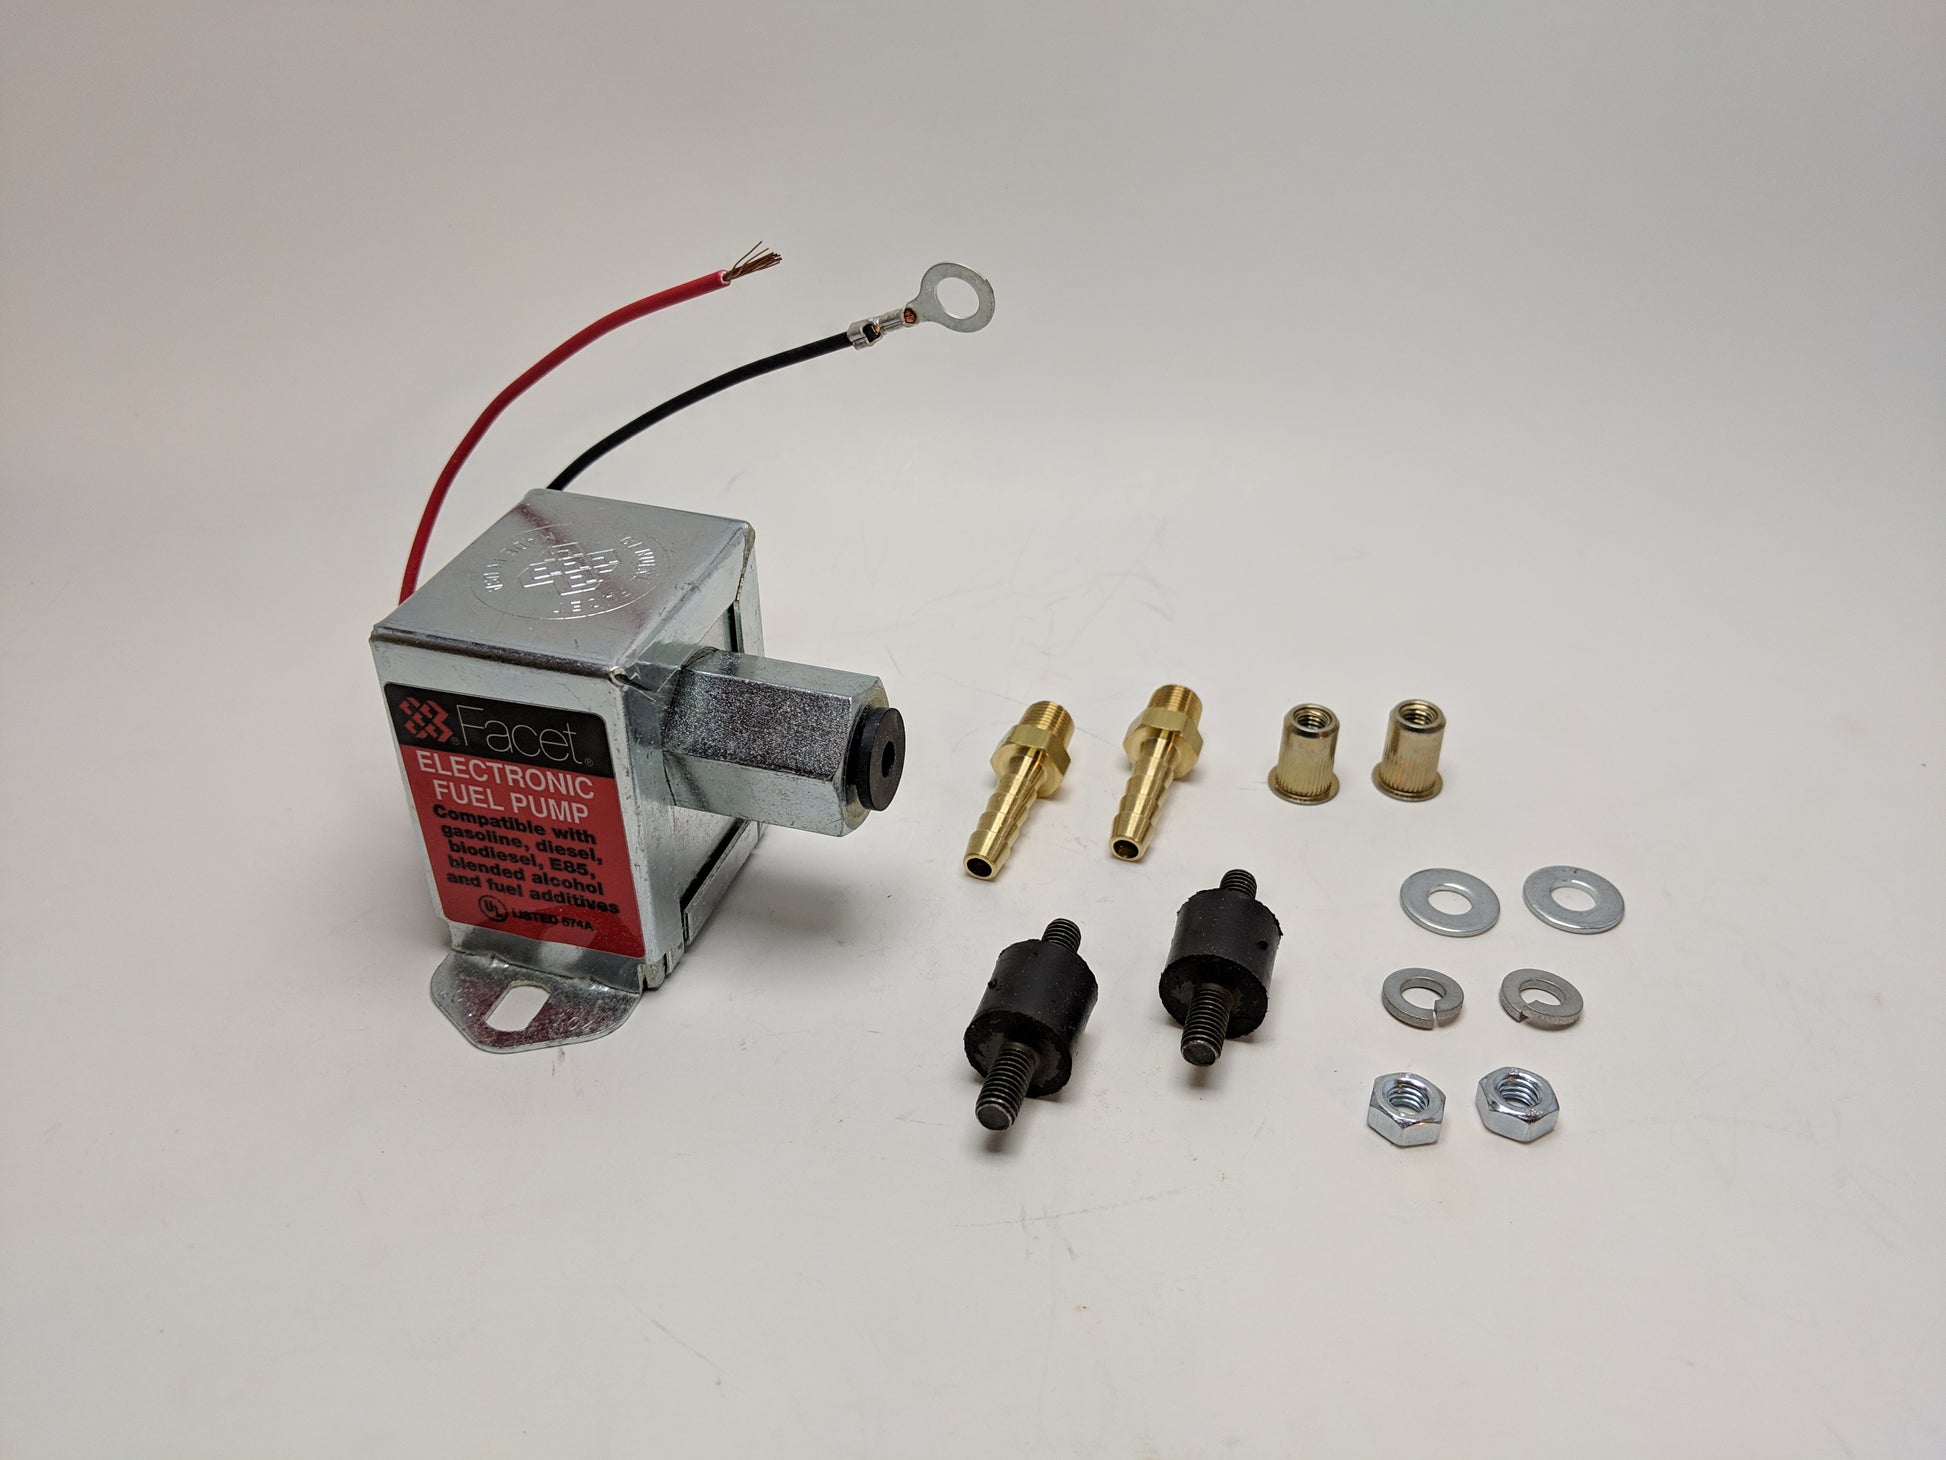 Solid State Fuel Pump Kit-reliability upgrade! – Bugeyeguys